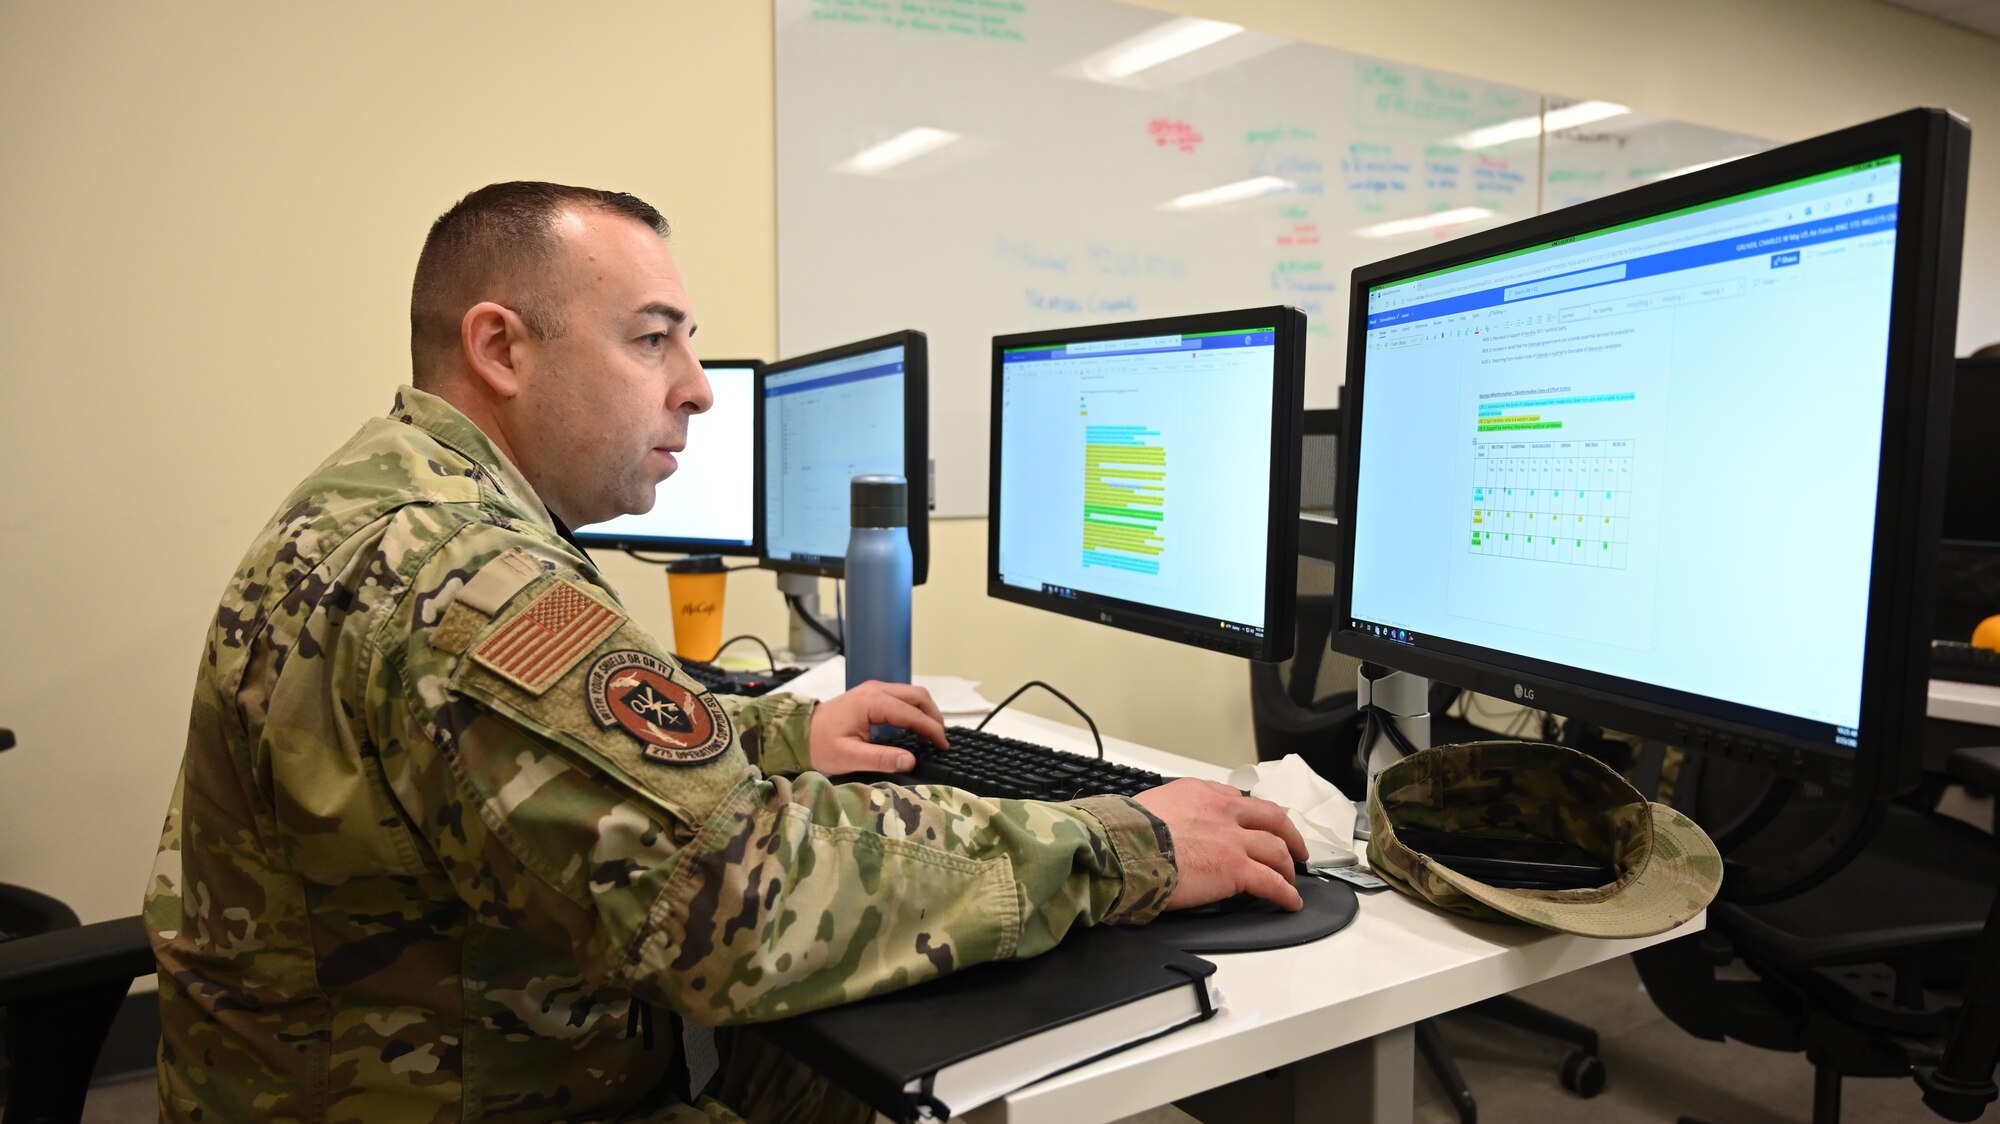 U.S. Air Force Maj. Charles Gruver, 275th Operations Support Squadron flight commander, Maryland Air National Guard prepares his workstation before the start of Cyber Blitz 22-3 at Warfield Air National Guard Base, Middle River, Maryland on March 23, 2022.